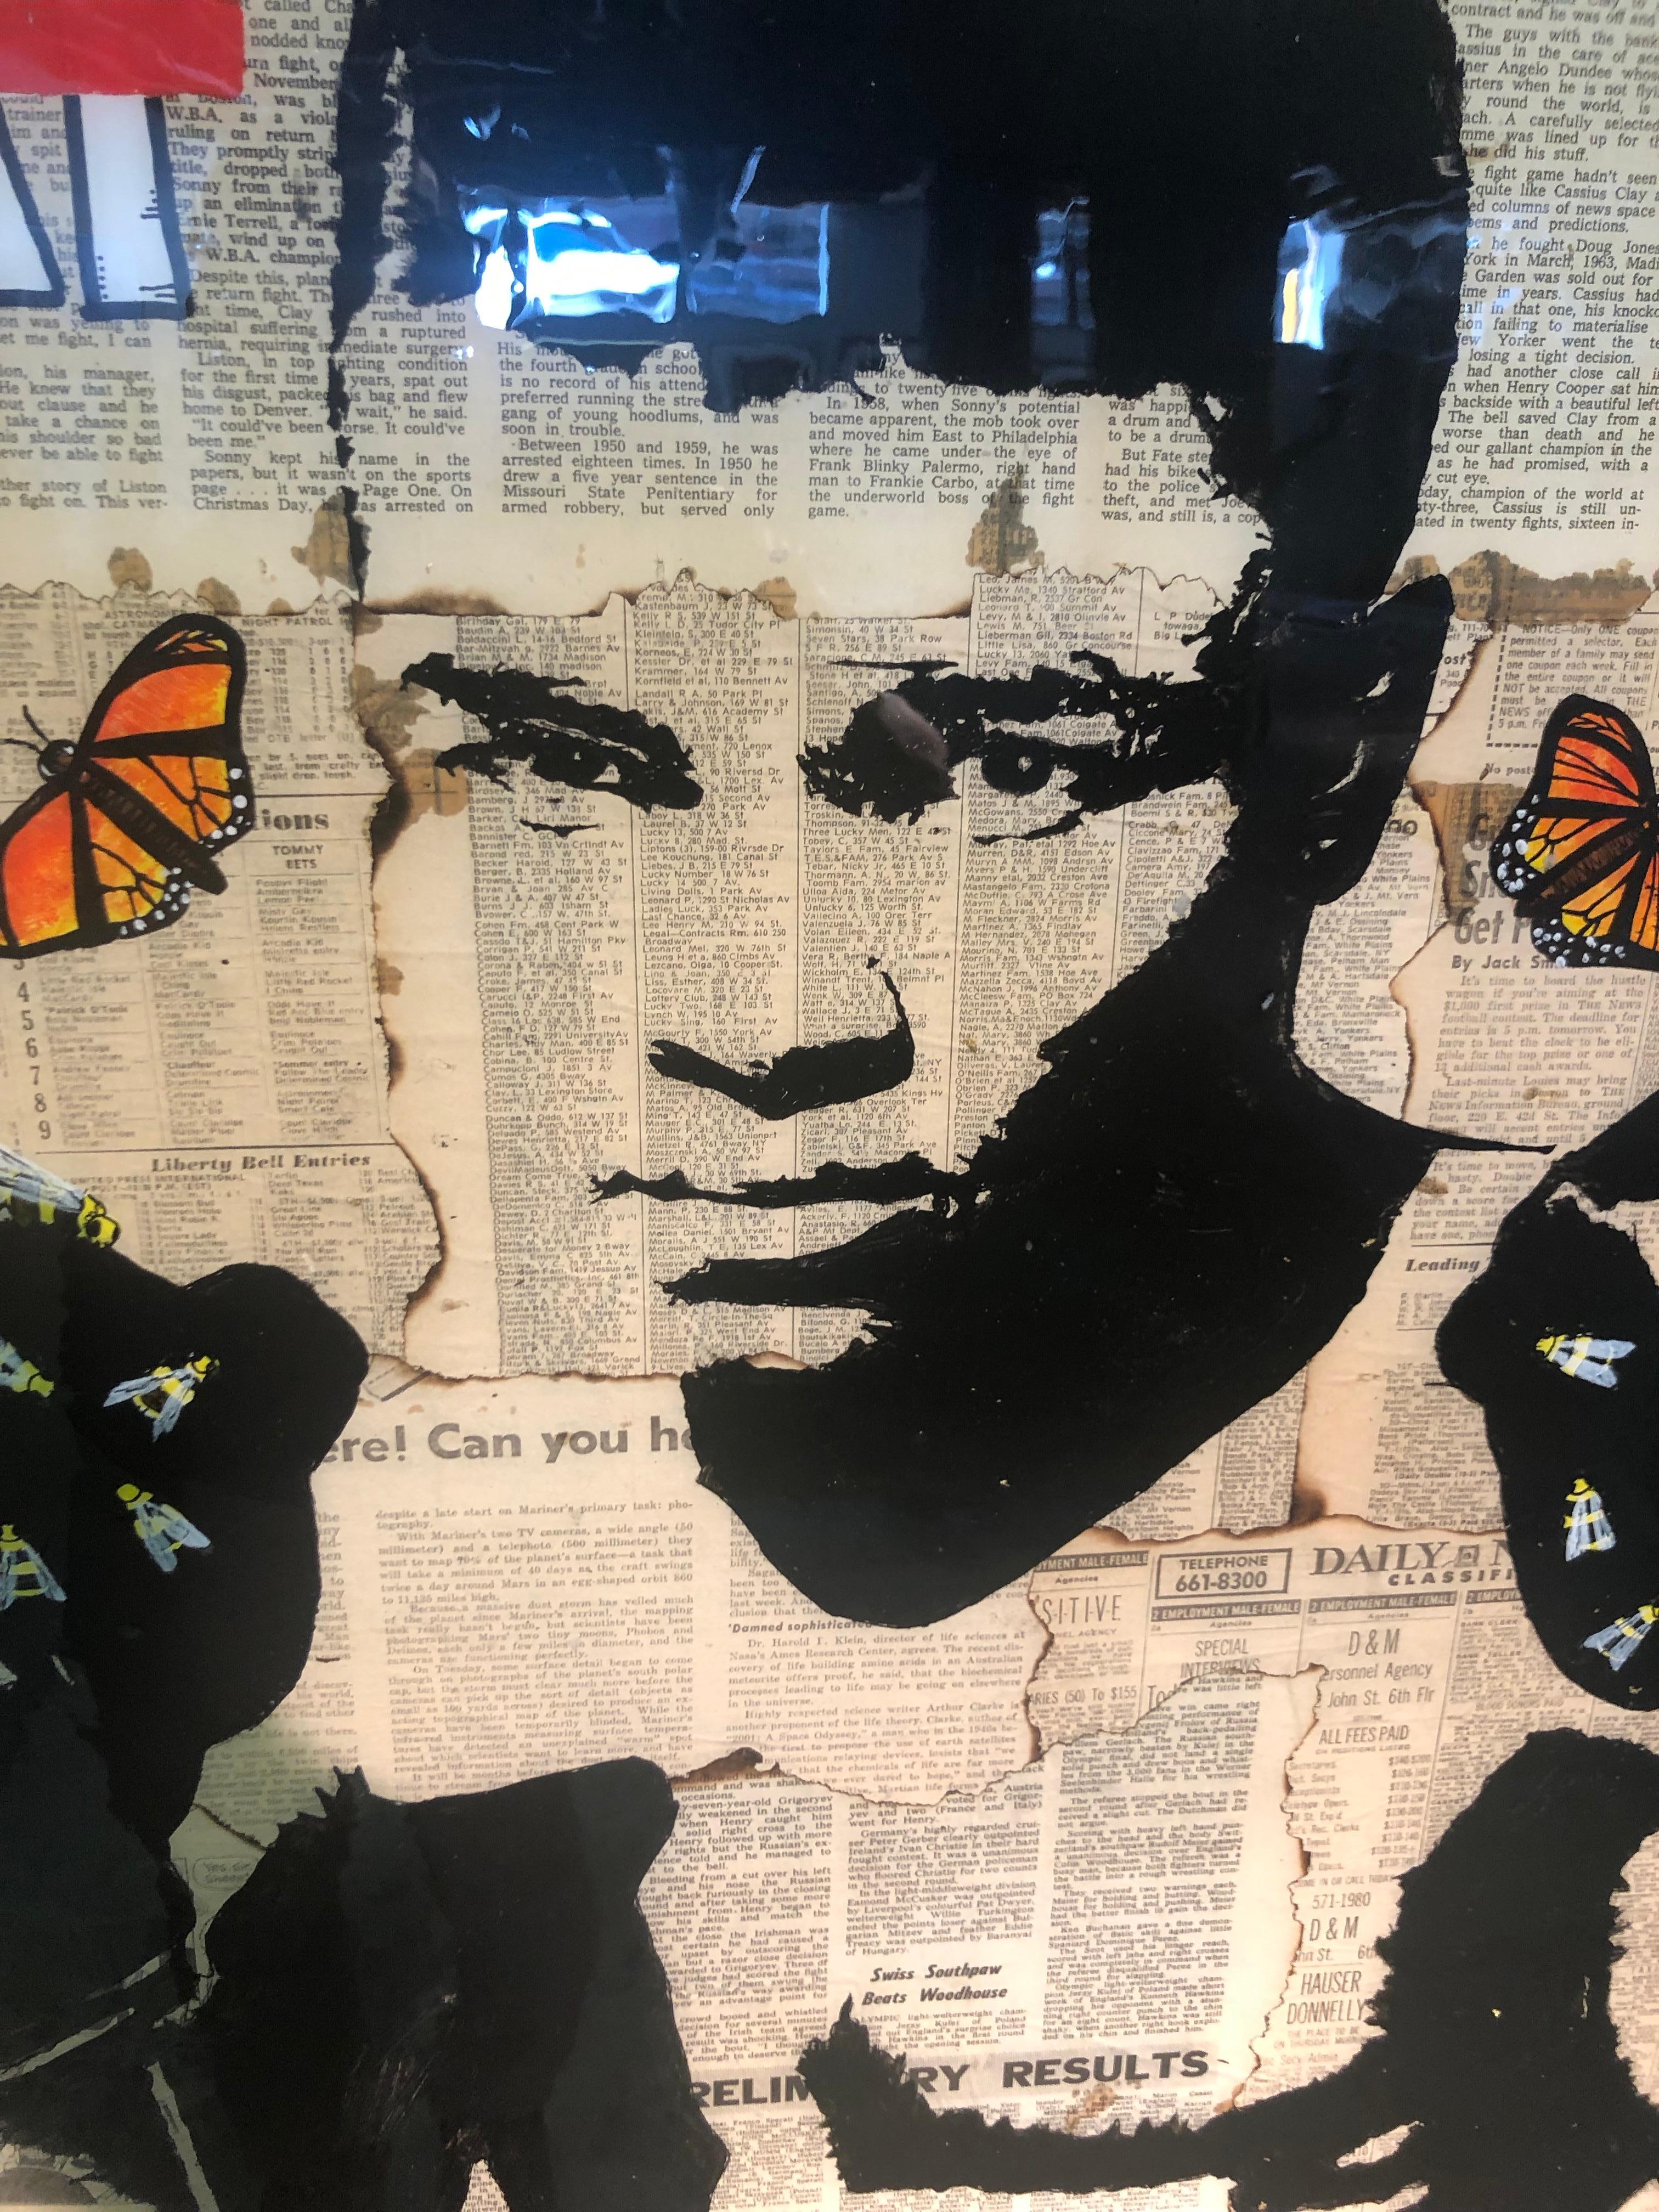 Rumble Young Man - Muhammad Ali, Pop Art Photo Collage with Vintage Newsprint - Beige Black and White Photograph by Patrick Burns